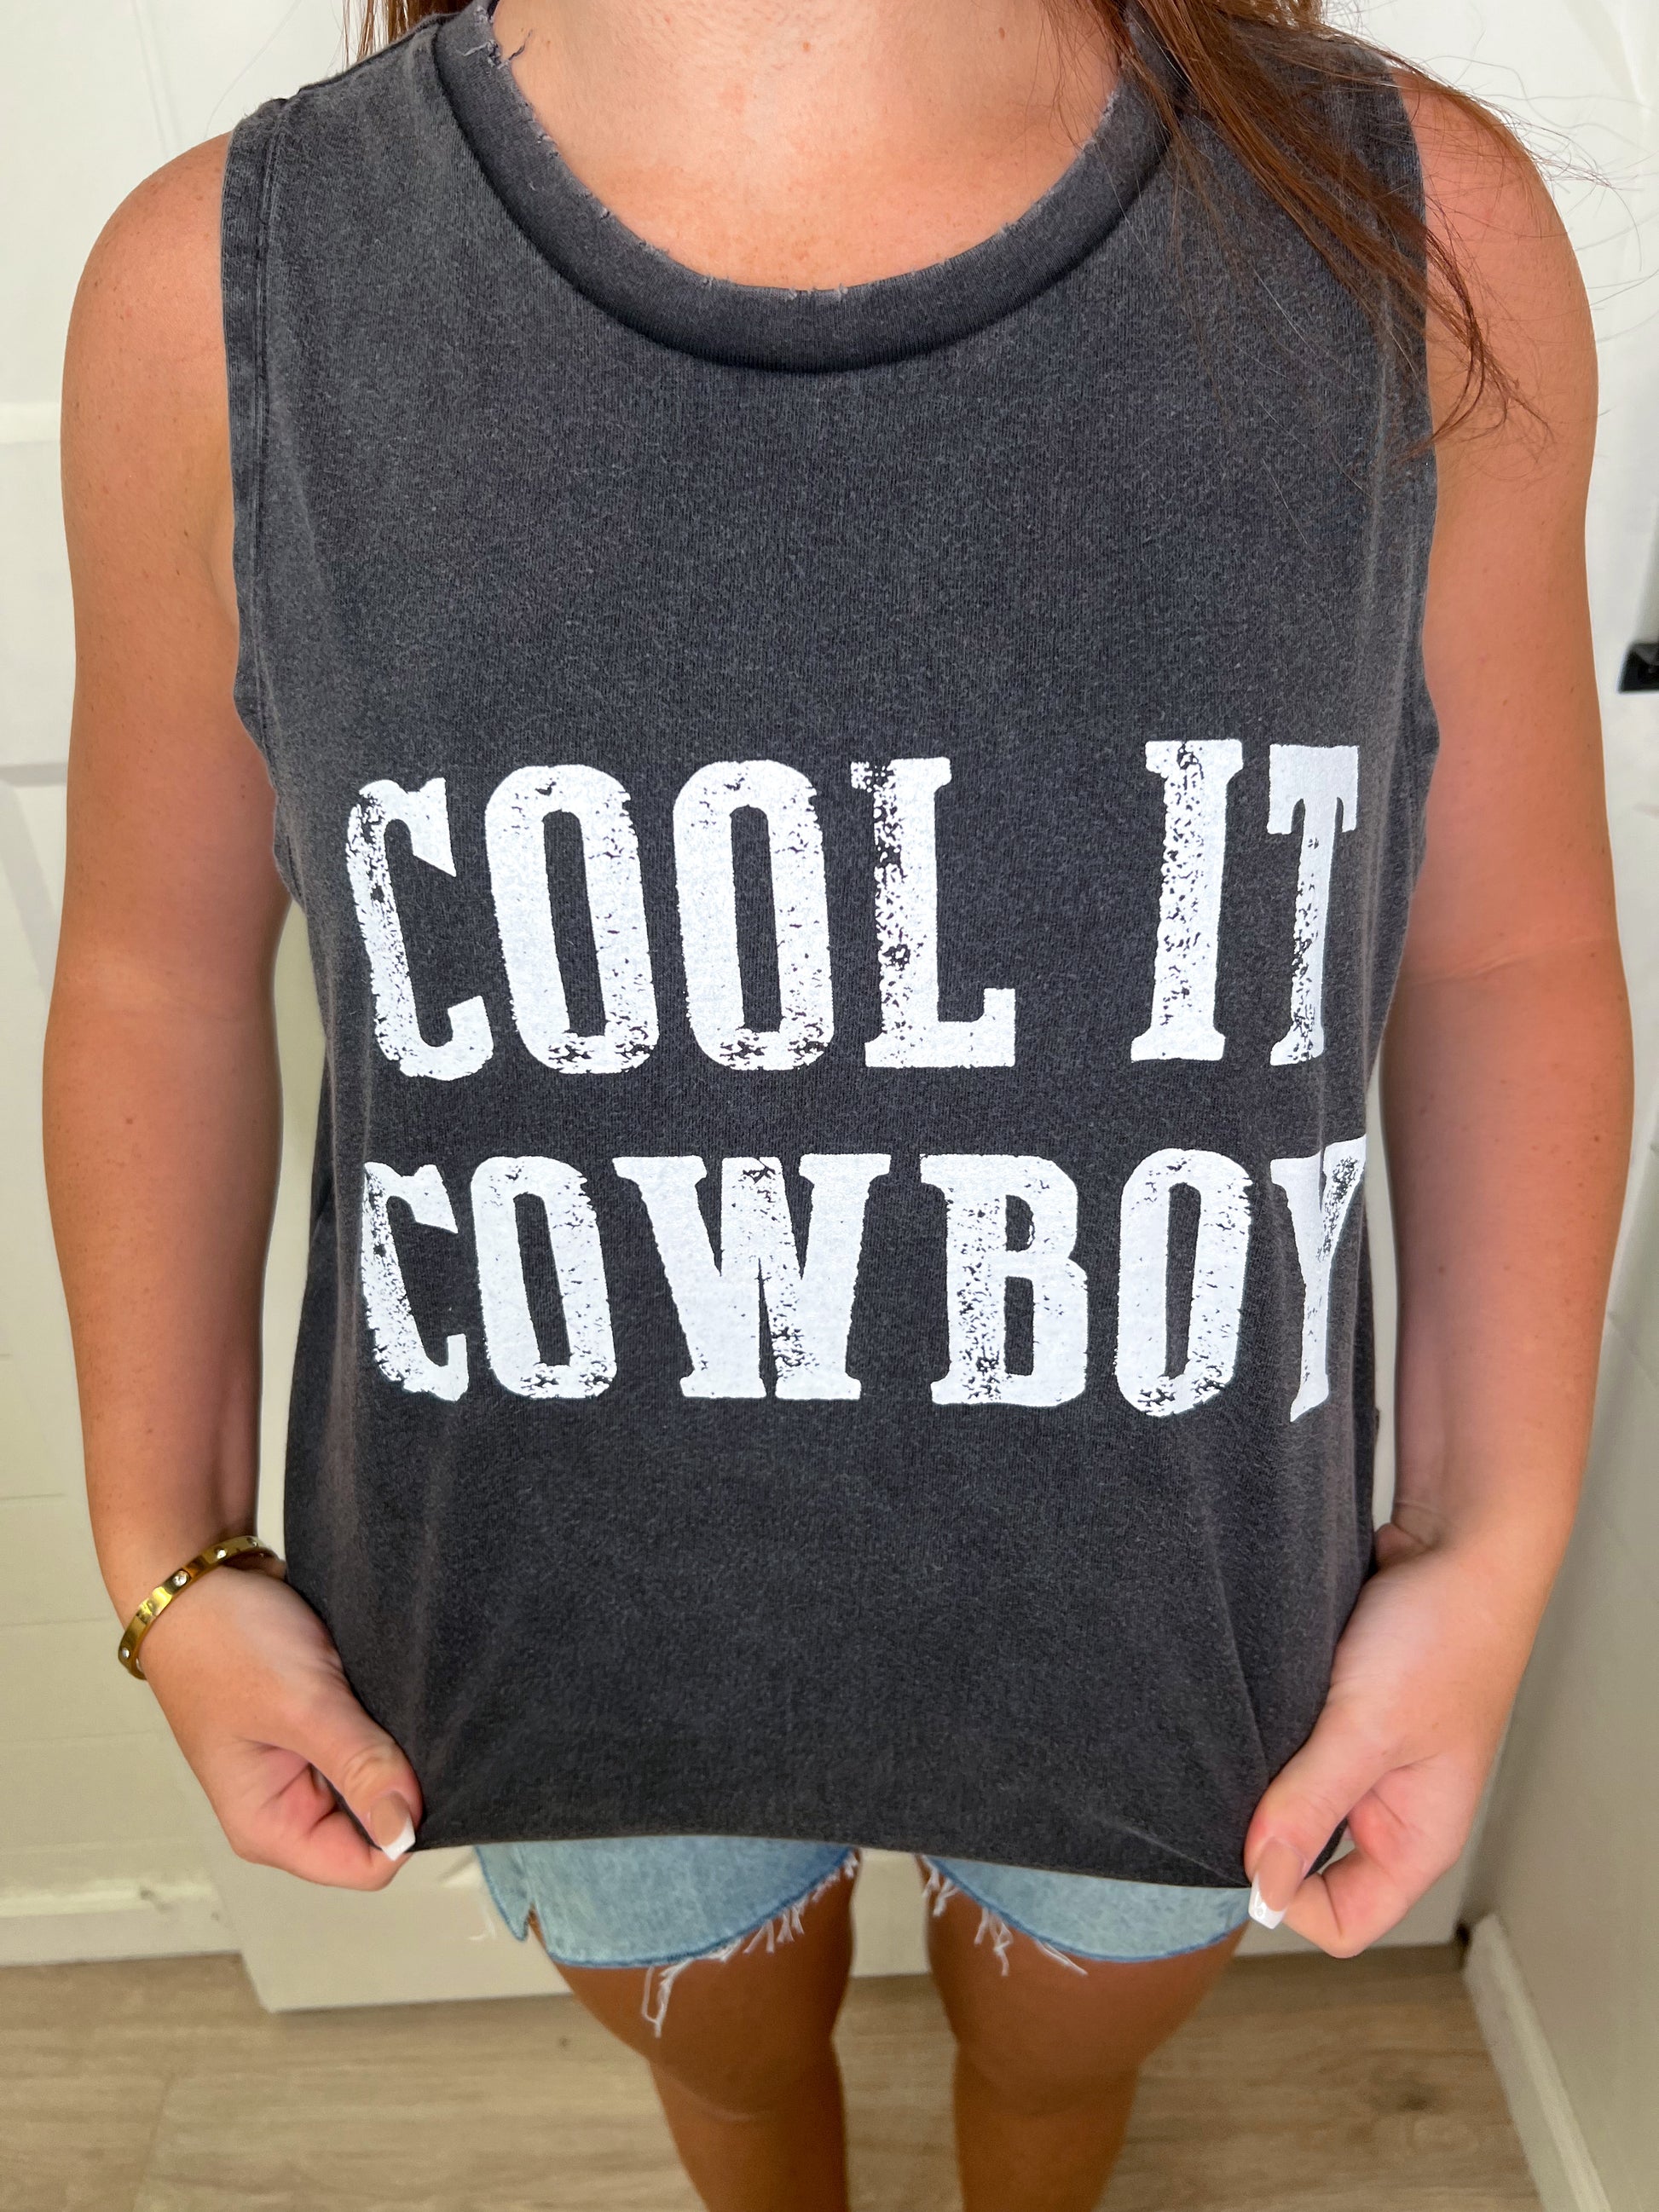 Cool It Cowboy Graphic Tank-TANK TOP-Zutter-6/20/23, FAVES, K2007-5066-The Twisted Chandelier